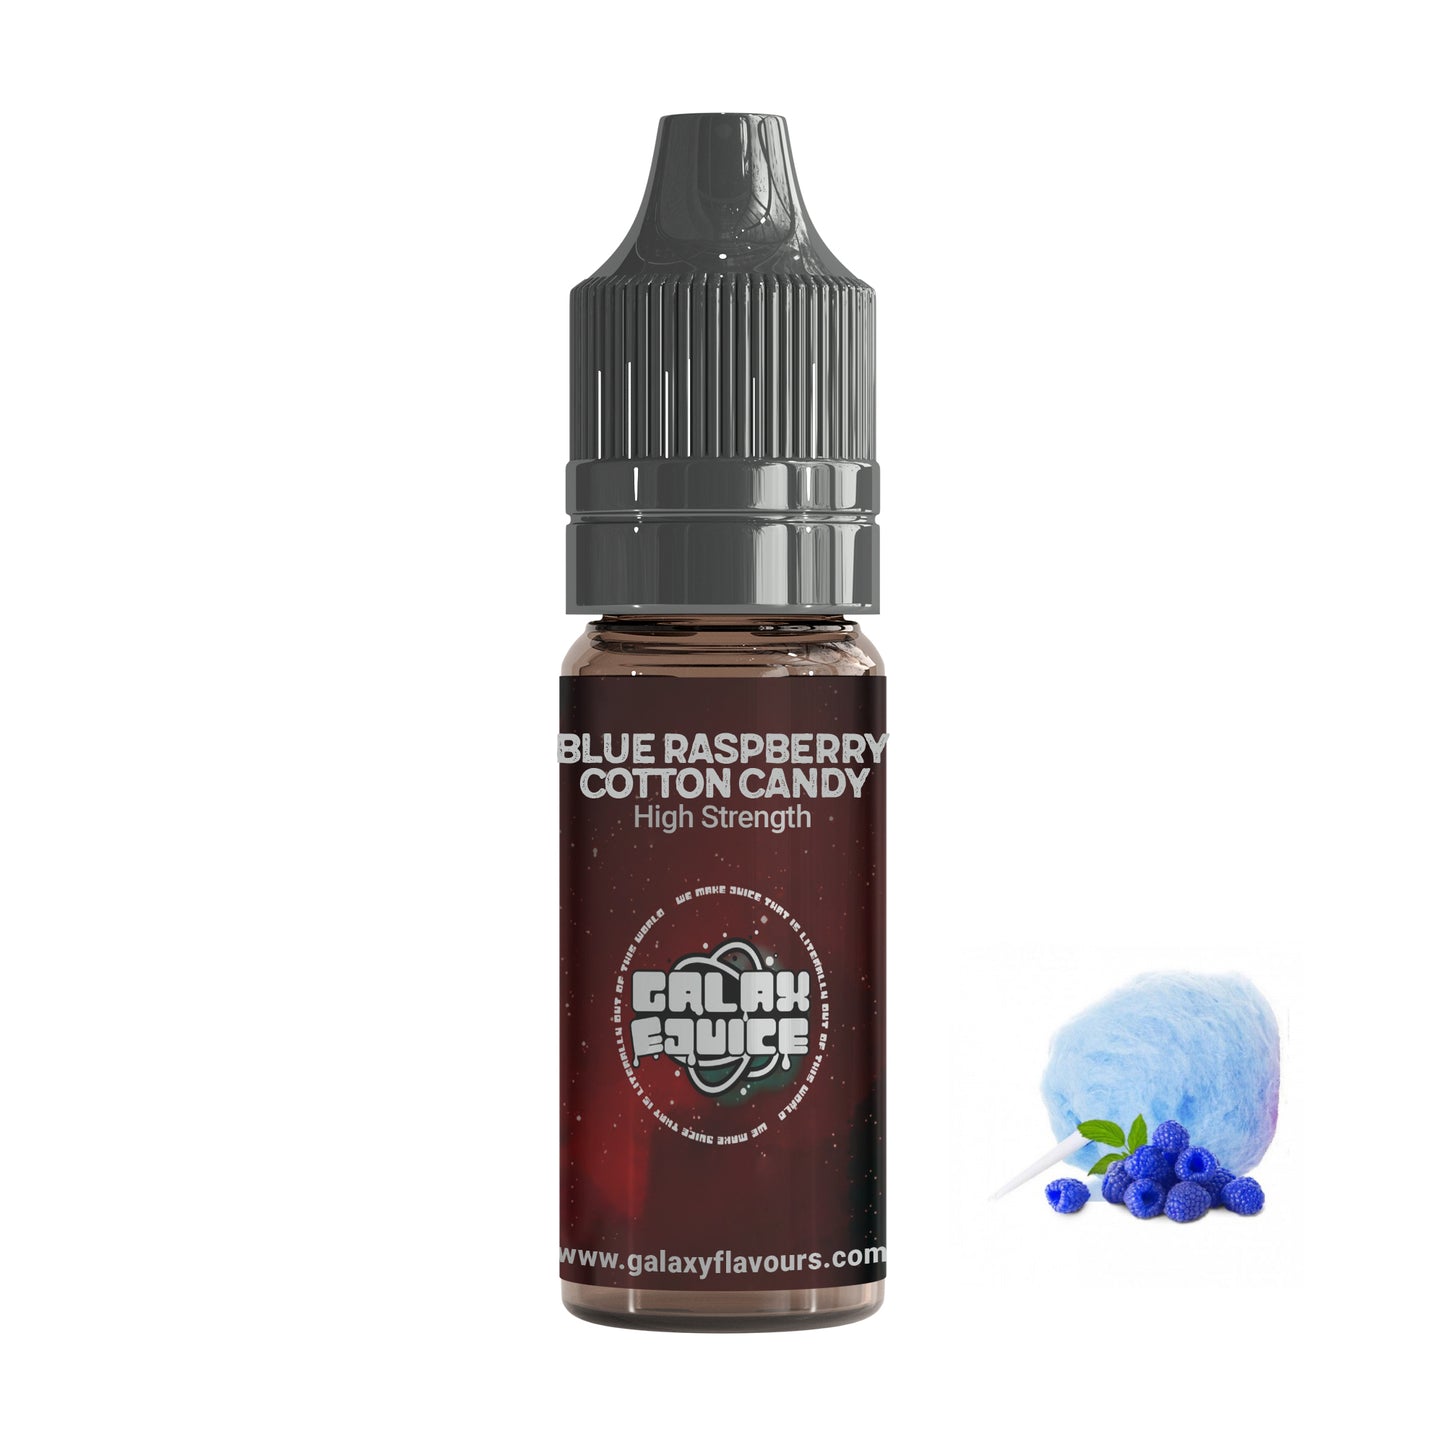 Blue Raspberry Cotton Candy High Strength Professional Flavouring.